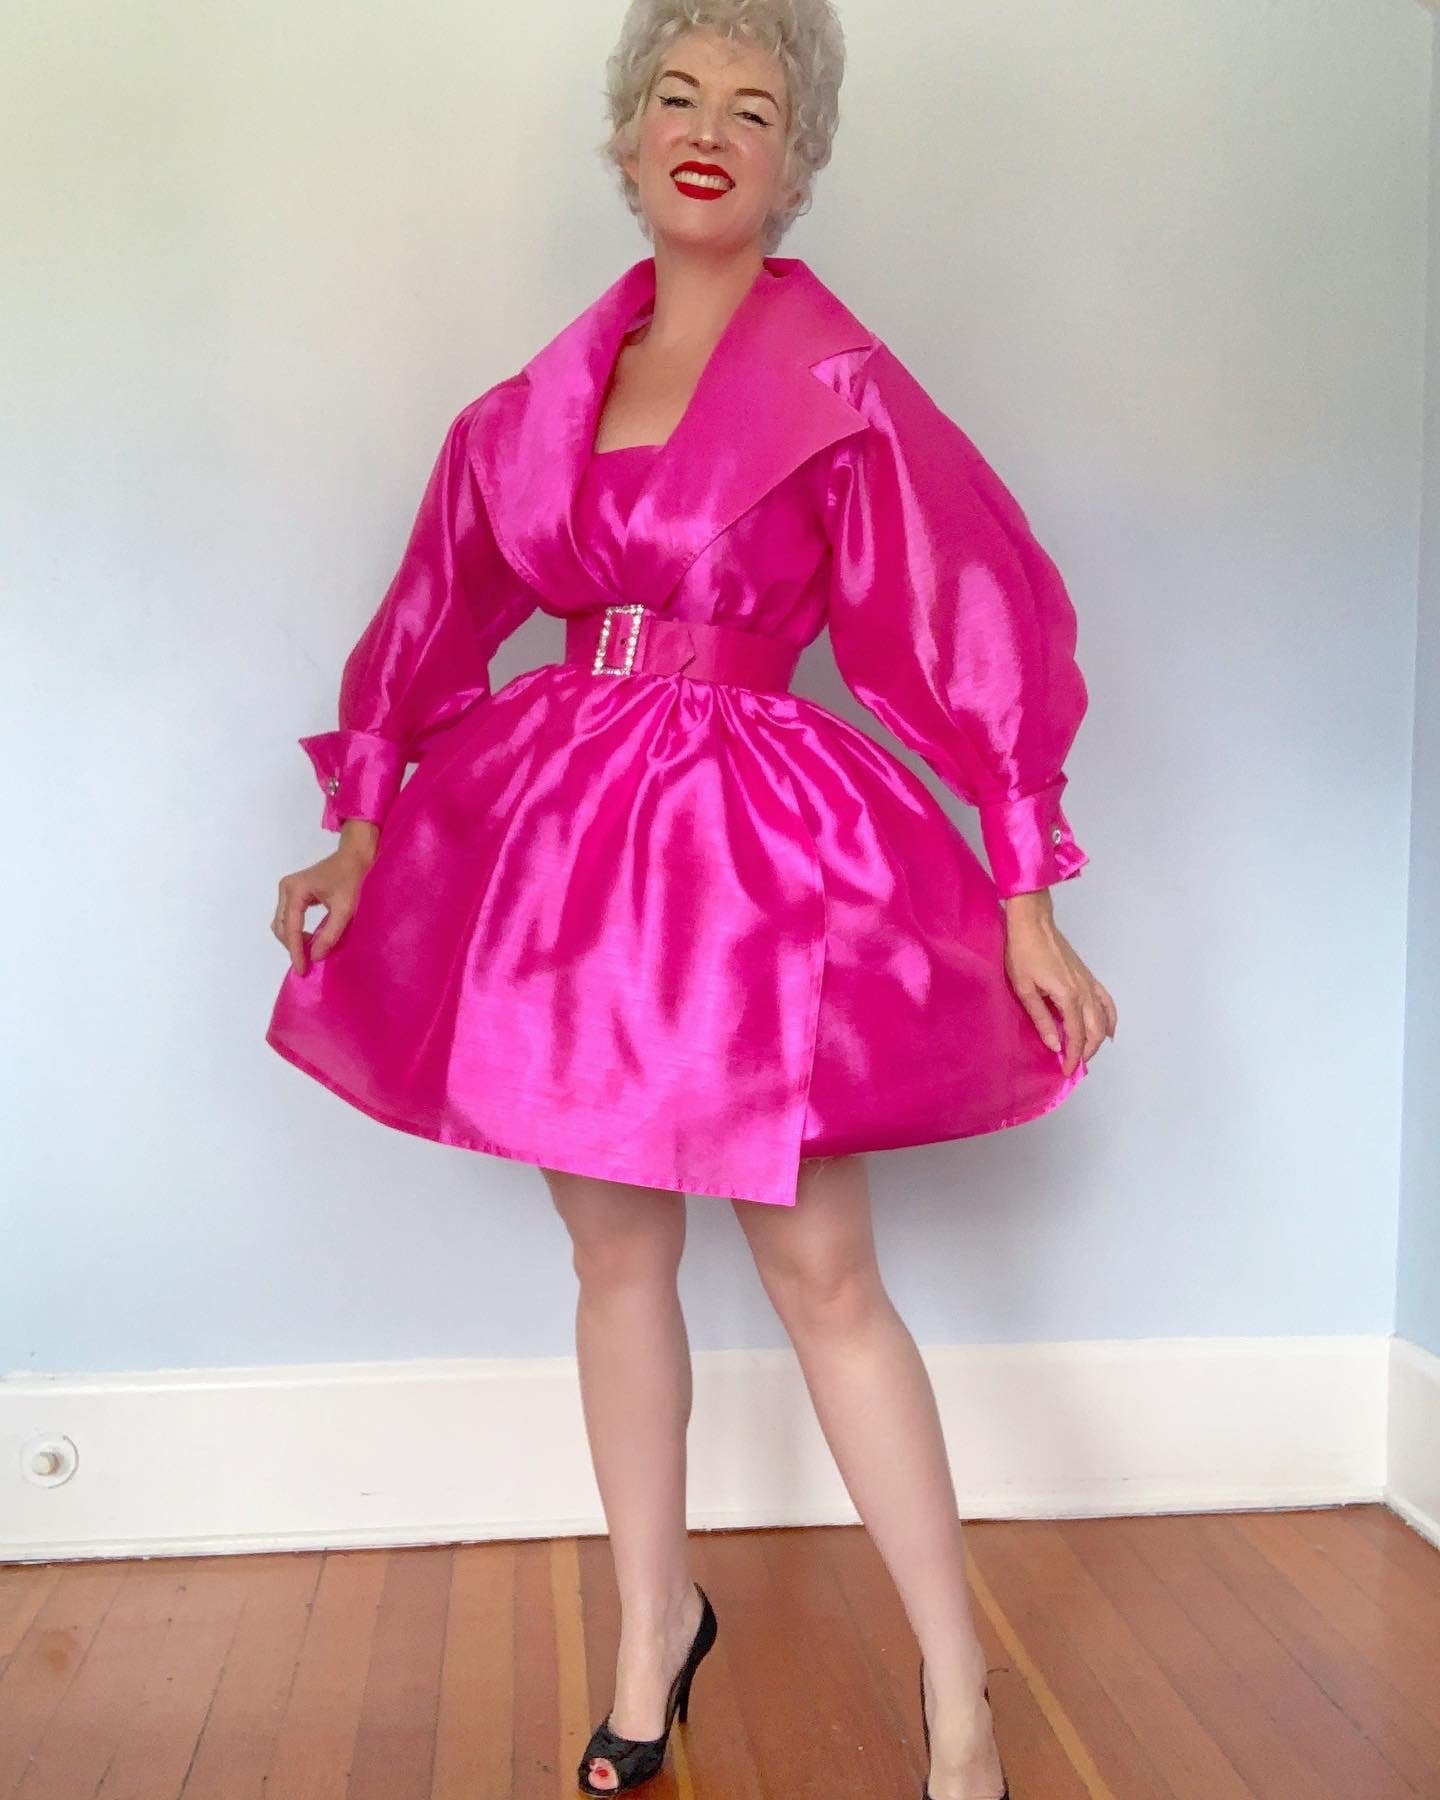 1980s Hot Pink Raw Silk Princess Coat with Belt by "En Francais by Huey Waltzer"